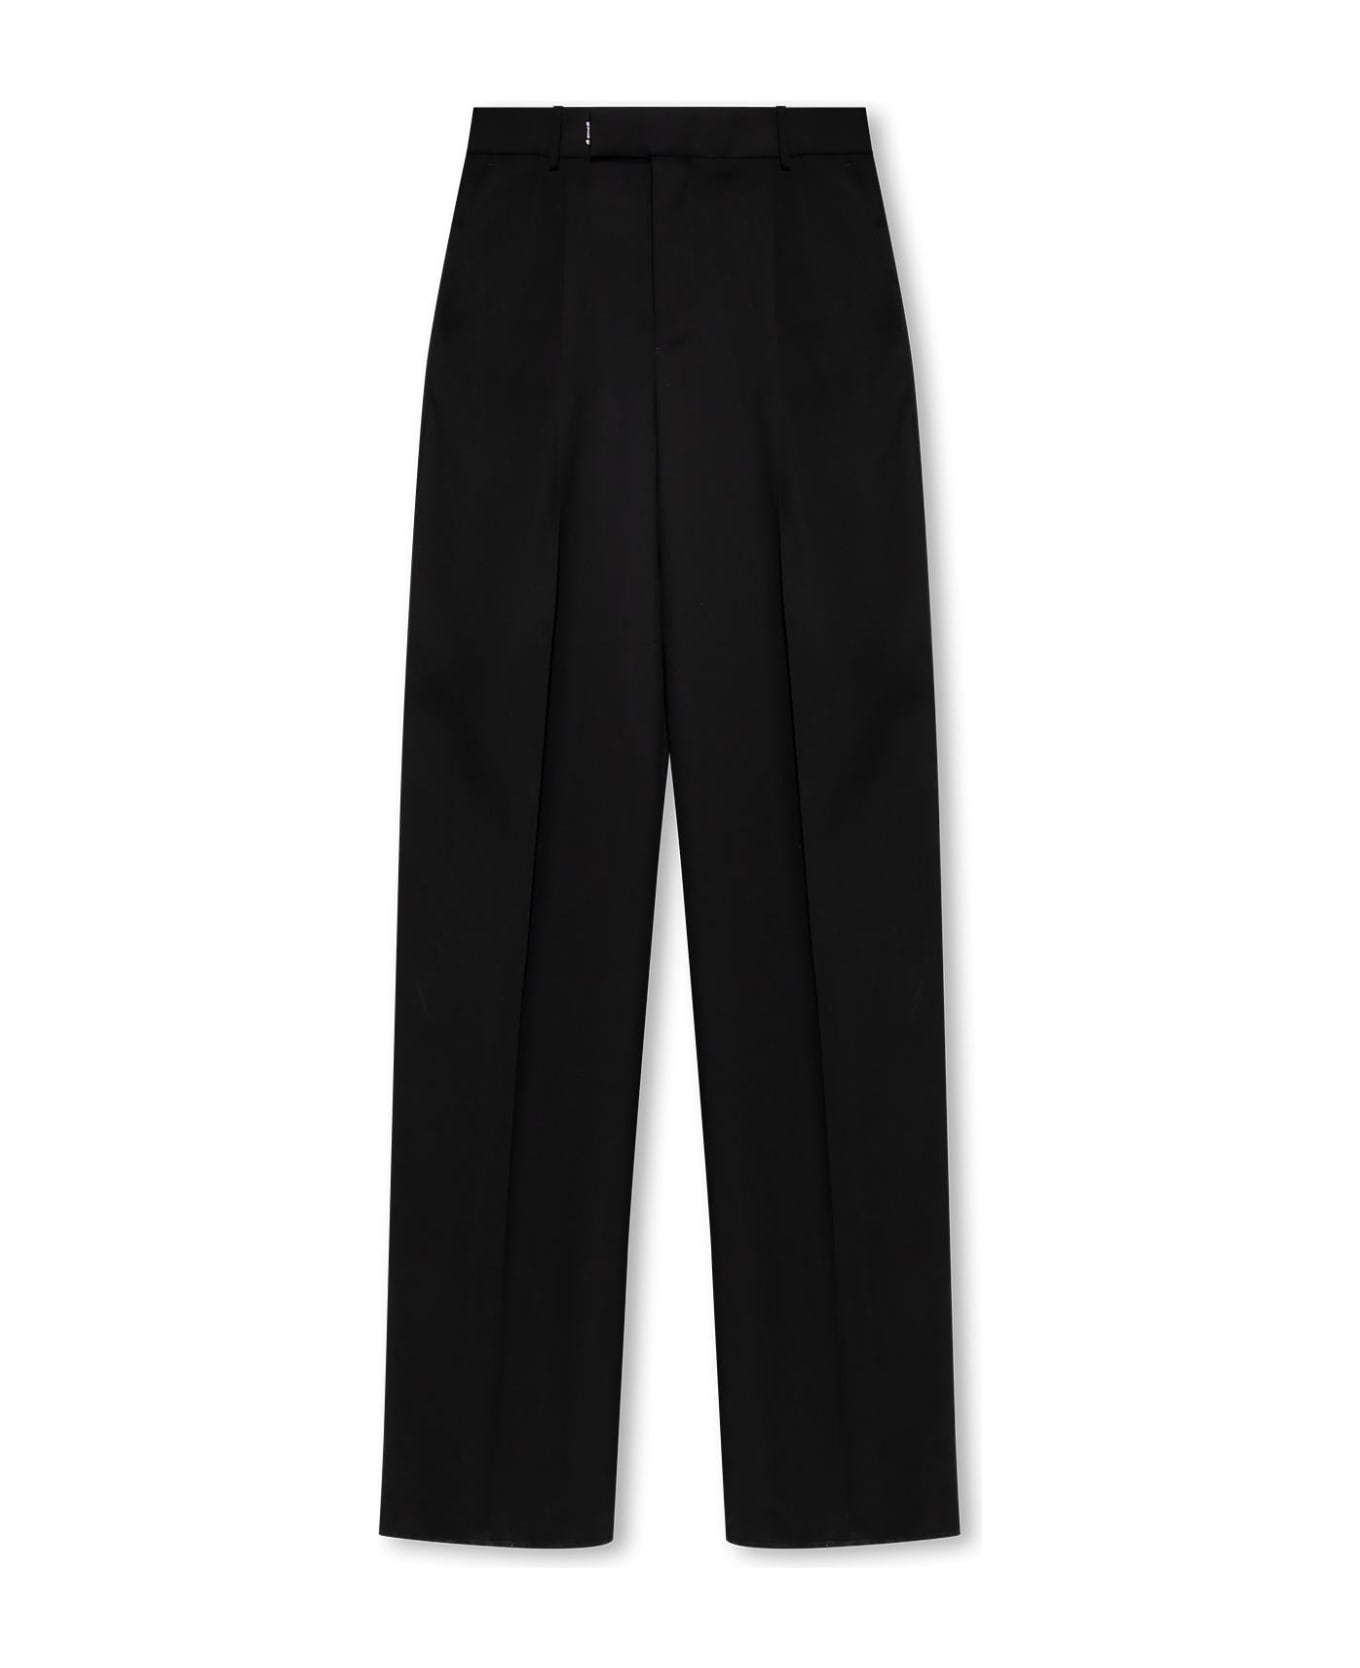 Alexander McQueen Pleat-front Trousers - Black ボトムス